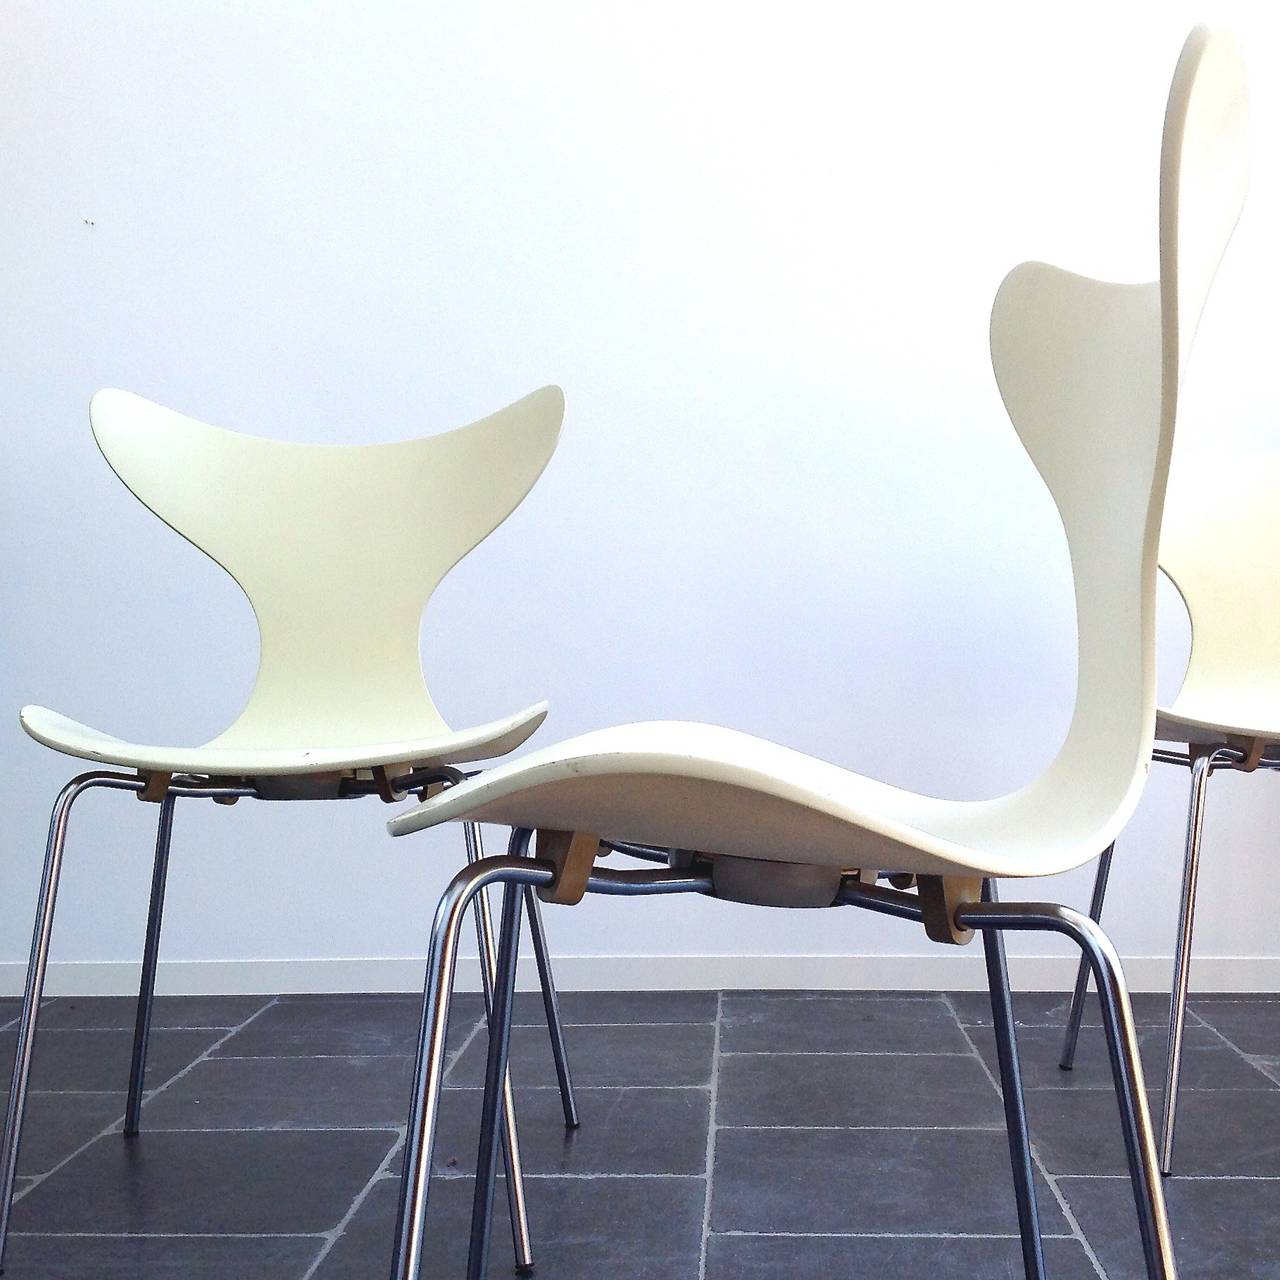 Plywood Set of 4 Seagull Chairs by Arne Jacobsen for Fritz Hansen, in original condition